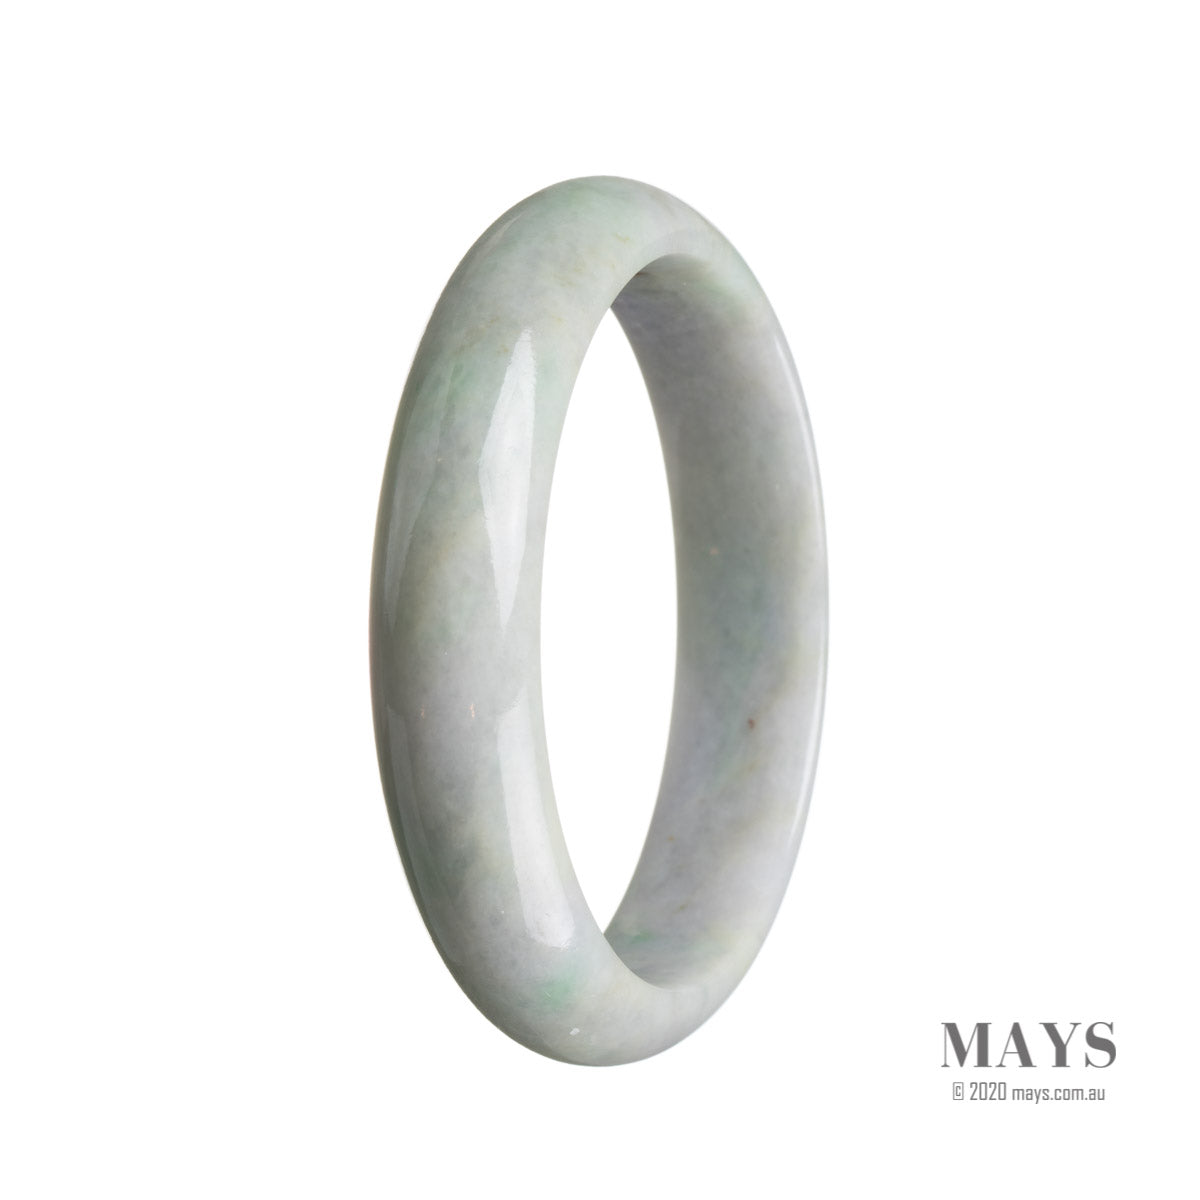 A close-up image of a lavender-colored bracelet made from genuine natural lavender and green jadeite jade. The bracelet is in the shape of a 59mm half moon and is sold by MAYS GEMS.